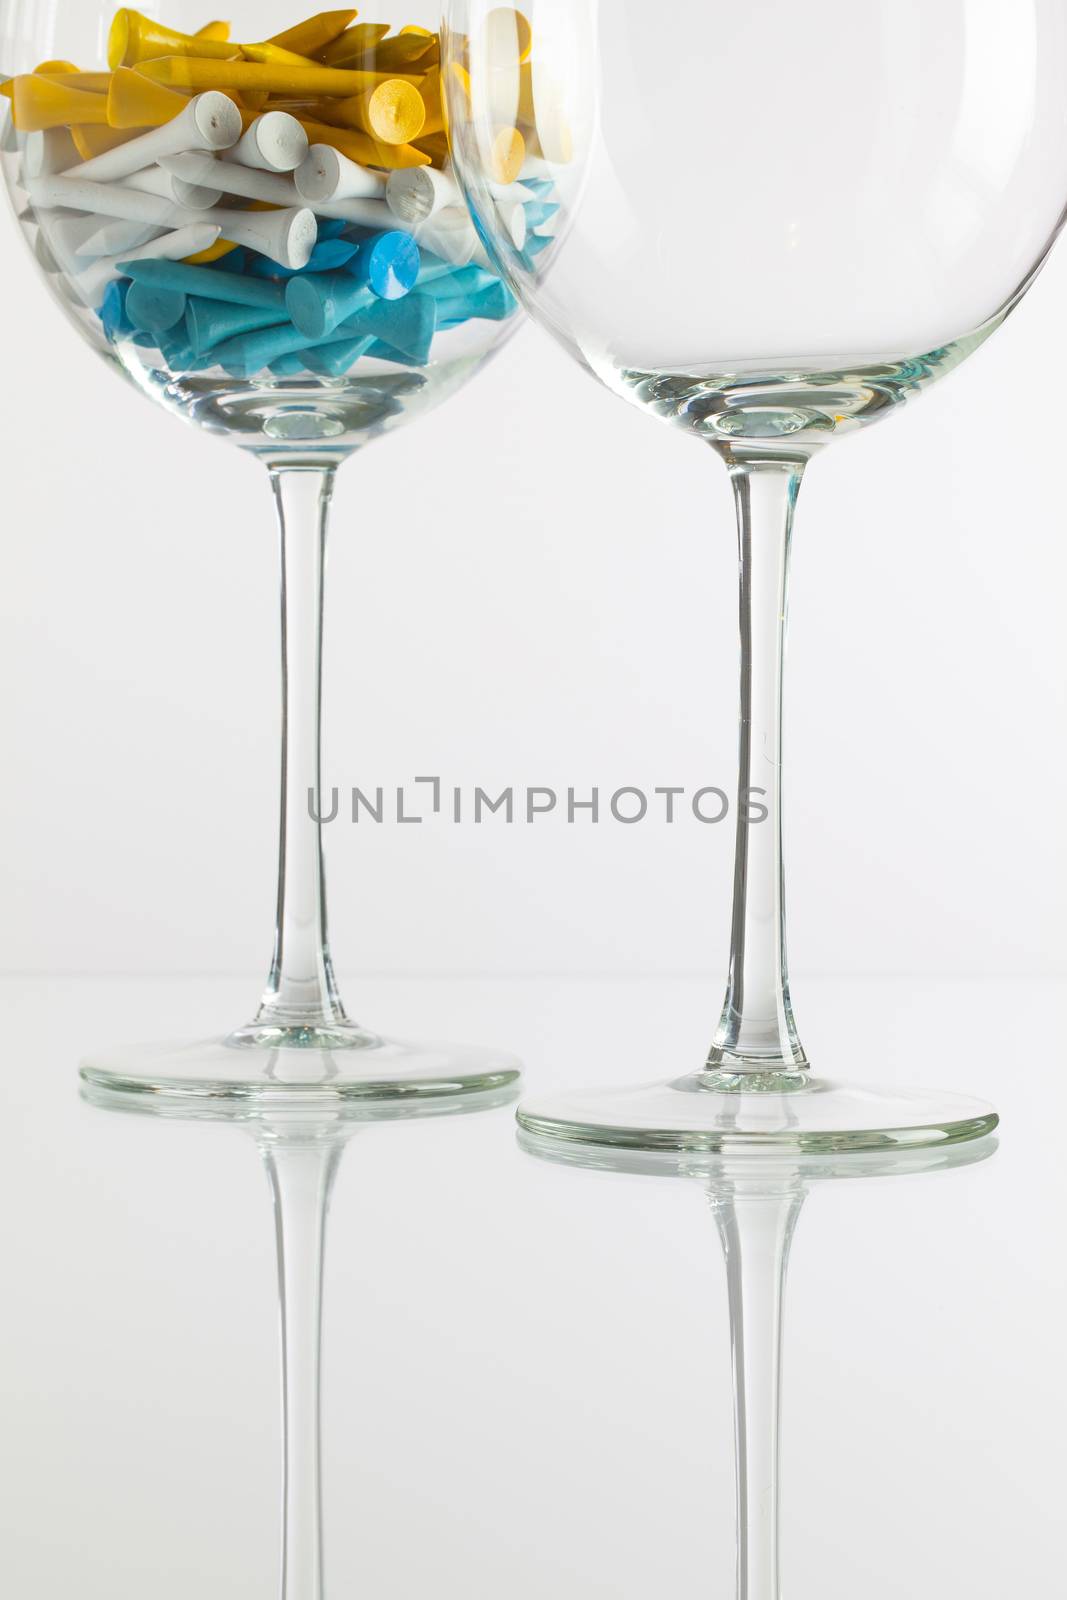 Two glasses of wine and golf equipments on the glass desk